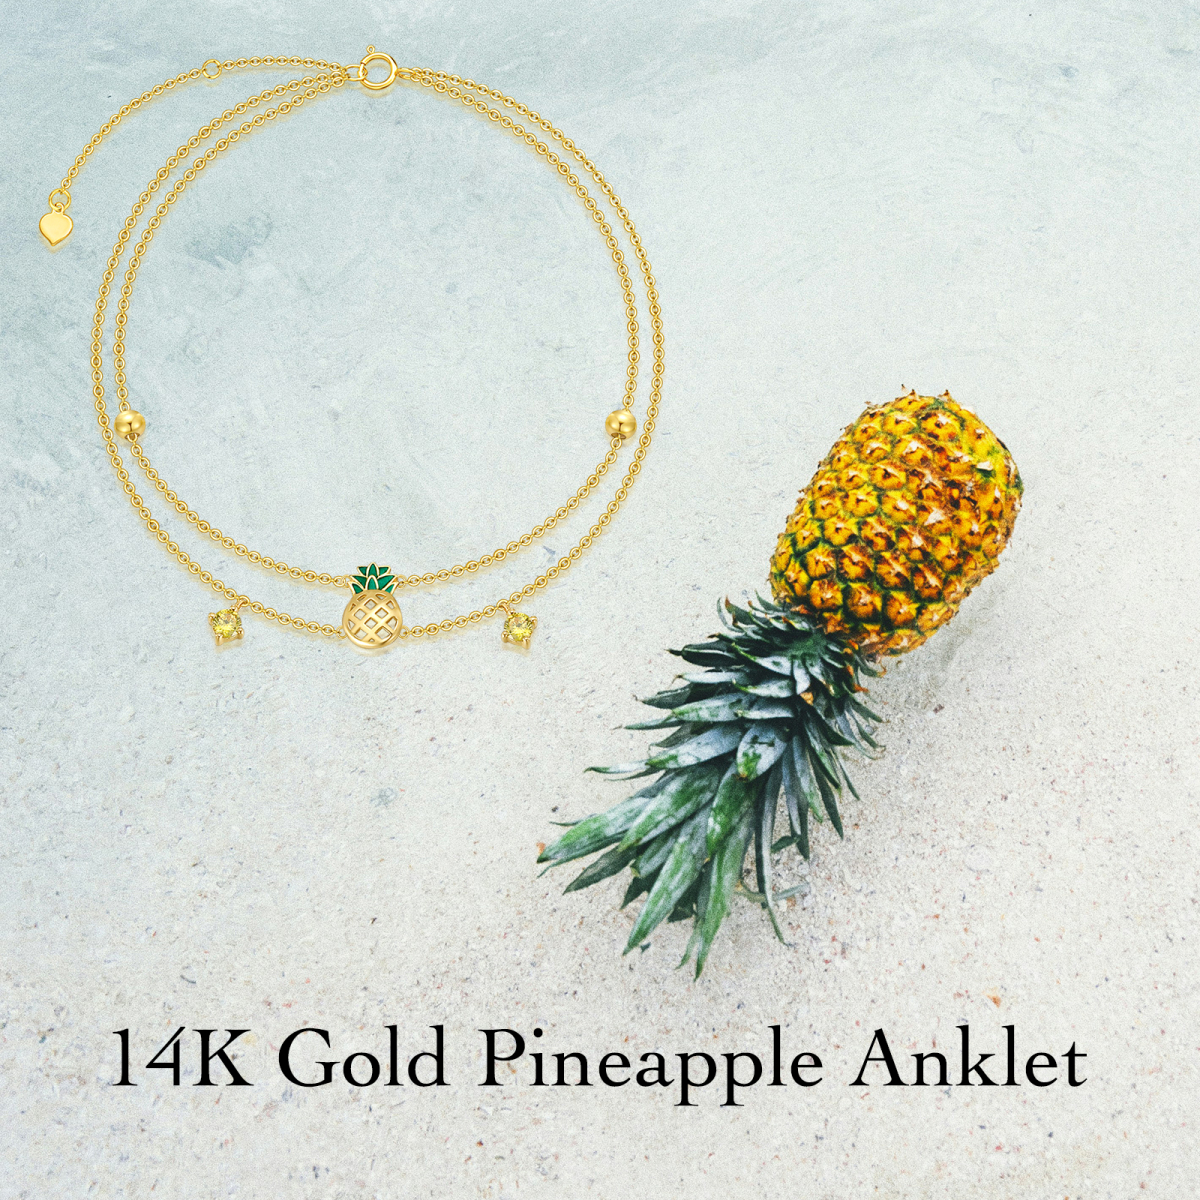 14K Gold Princess-square Shaped Cubic Zirconia Pineapple Multi-layered Anklet-6